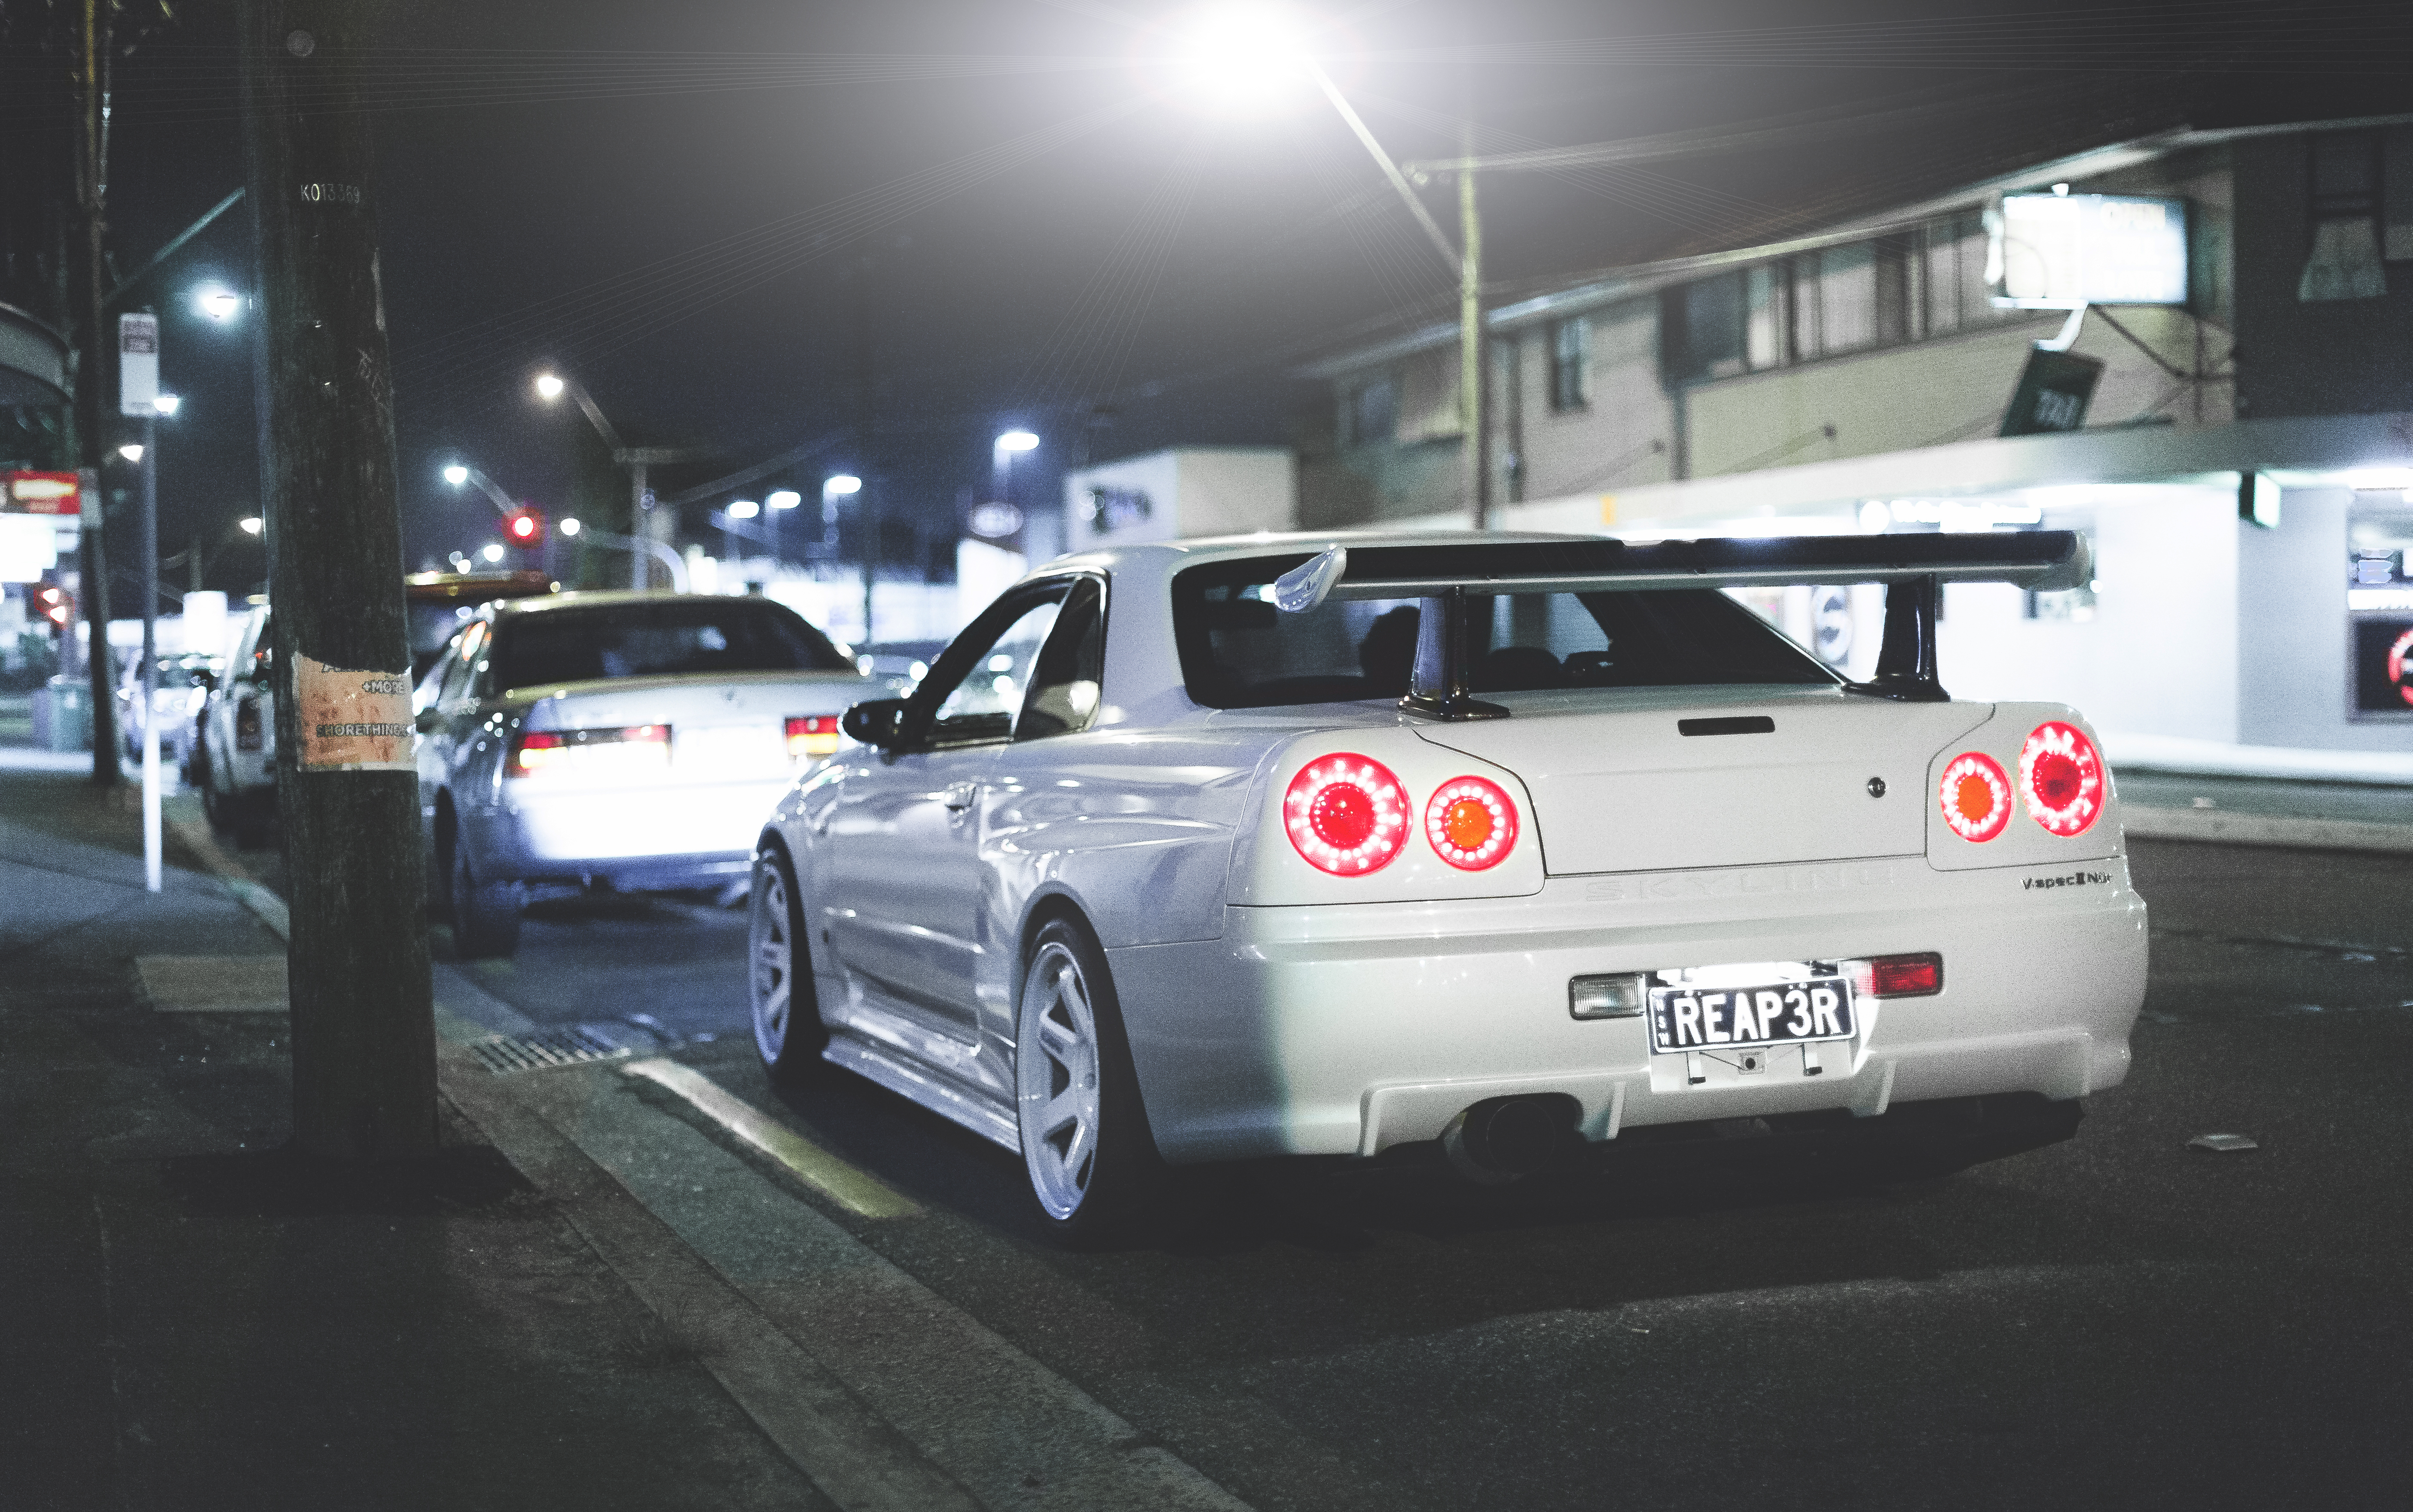 skyline, nissan, cars, back view, rear view, gt-r, r34 iphone wallpaper